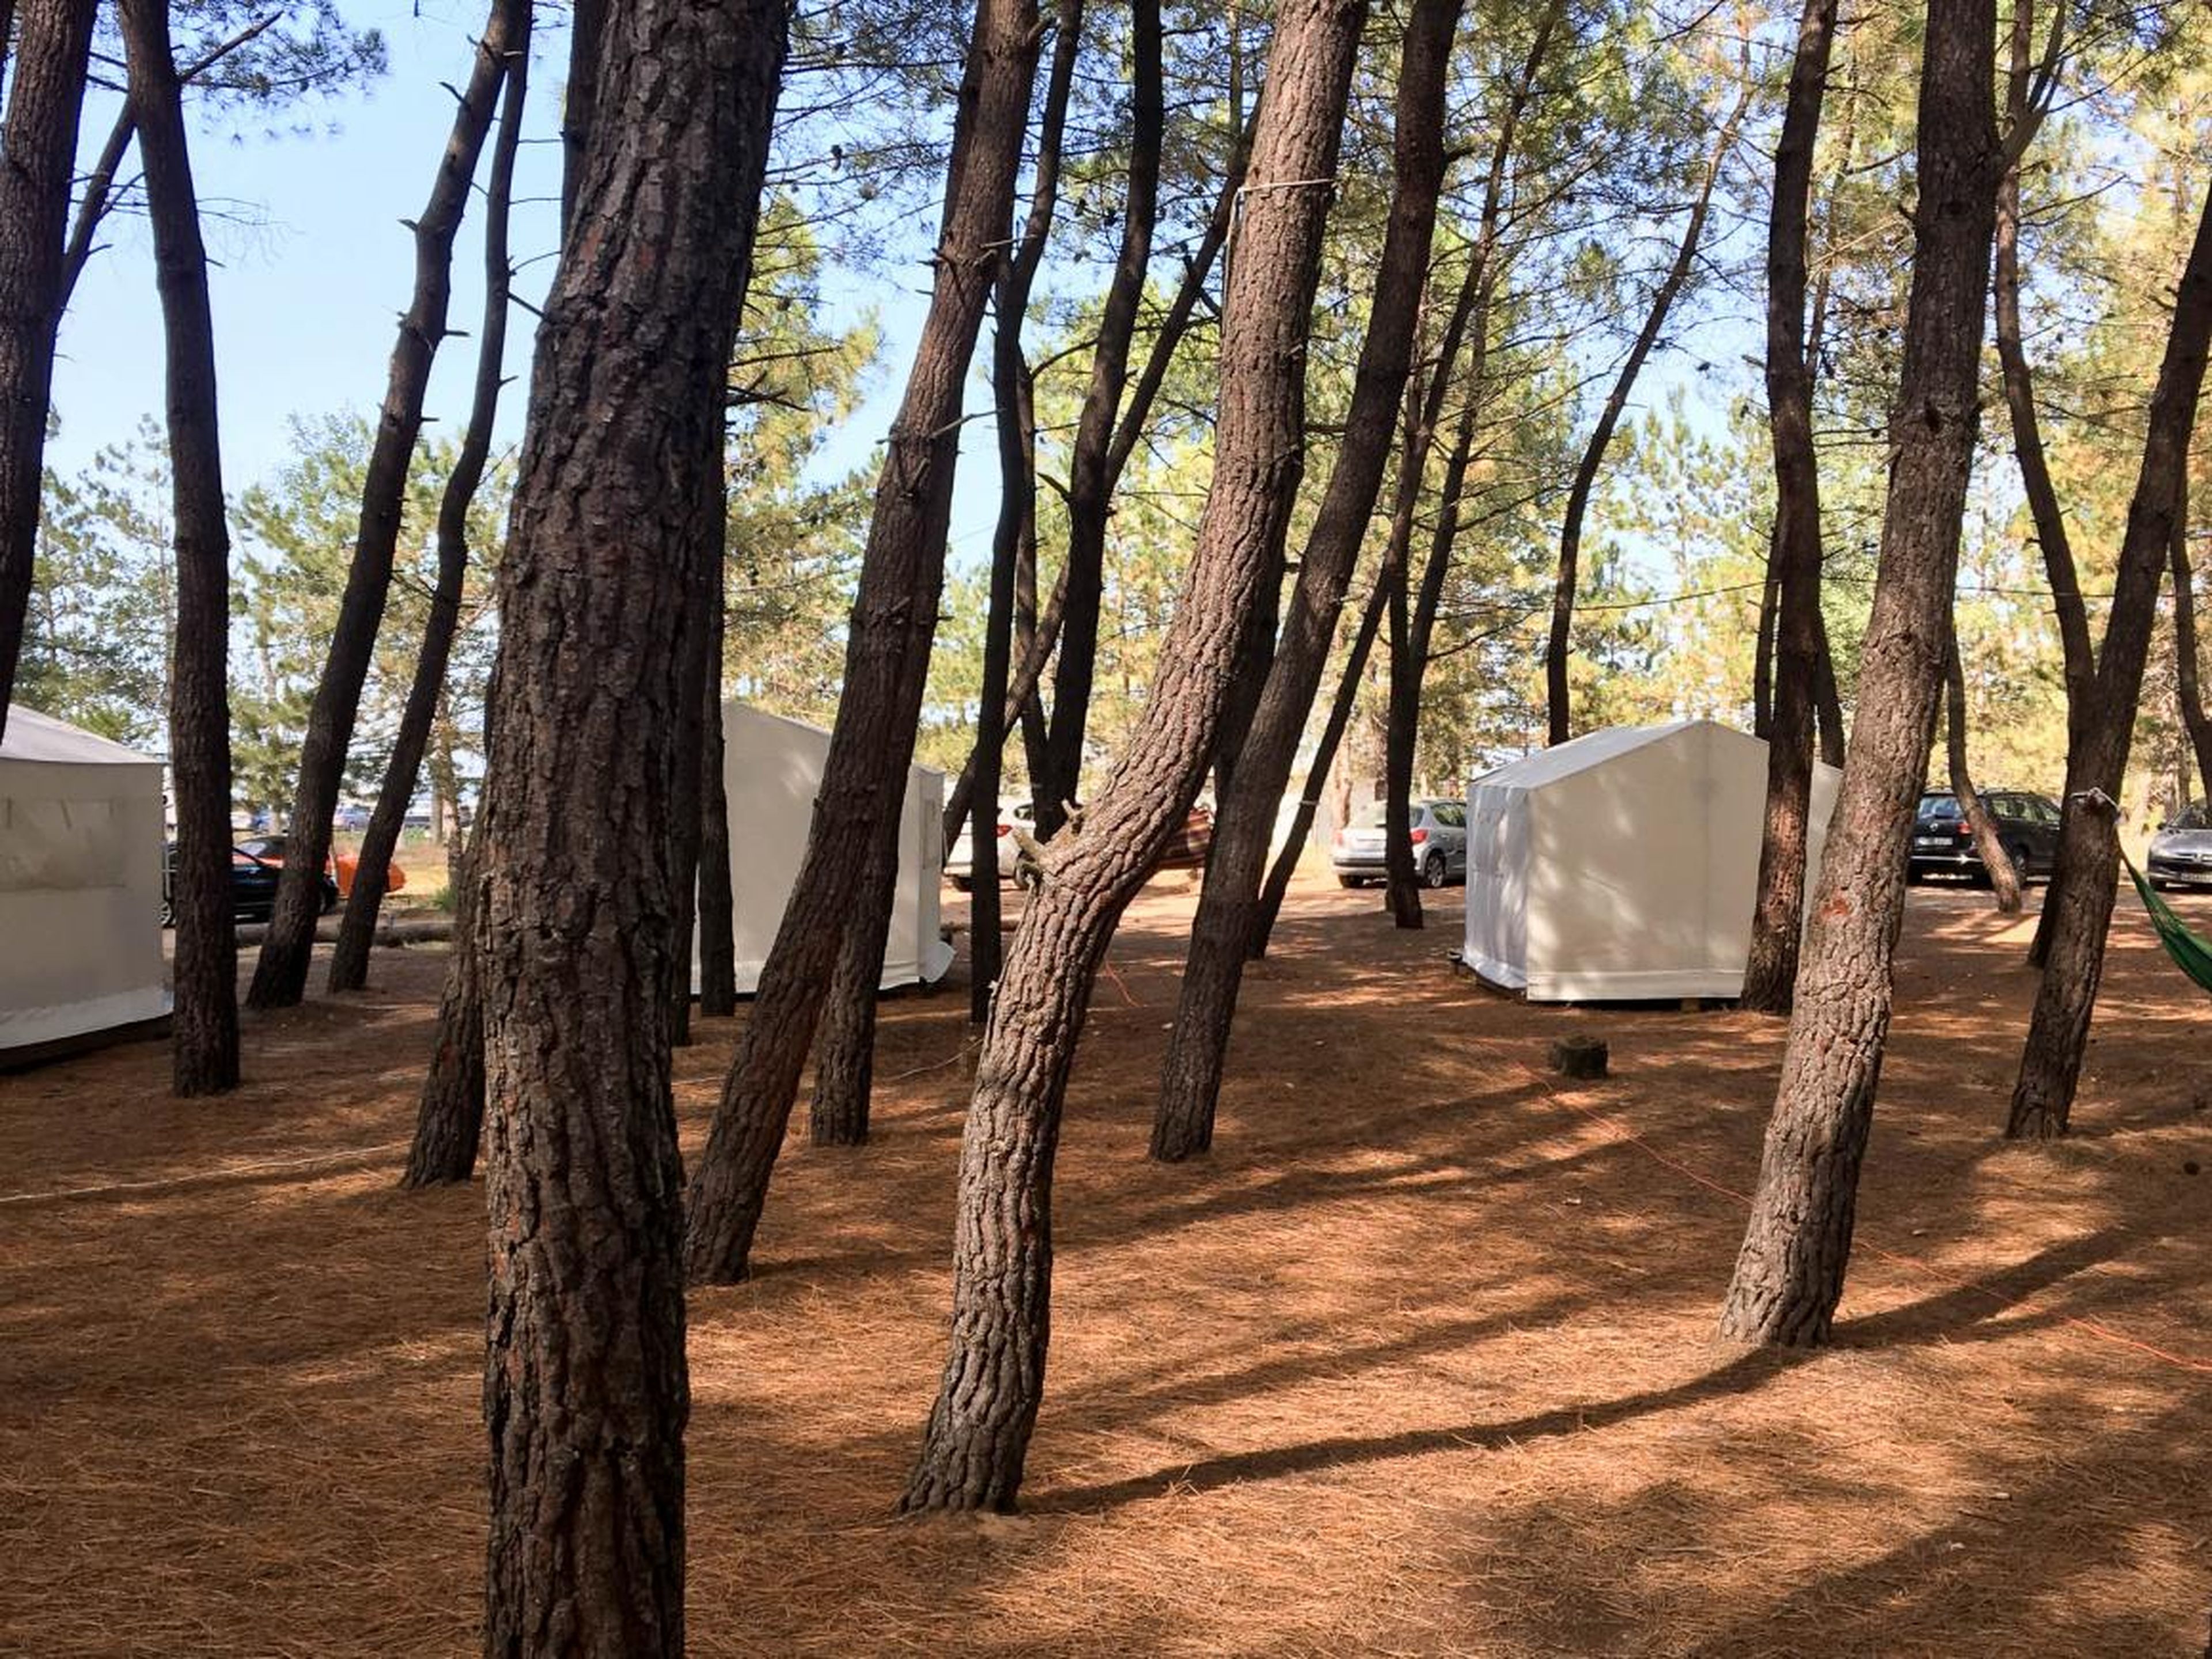 Because of zoning restrictions, there aren't really hotels on the beach. Instead, the beach is lined with campsites, RVs, trailers, and tents. It makes for one big communal party. I "glamped" in one of these tent-huts.